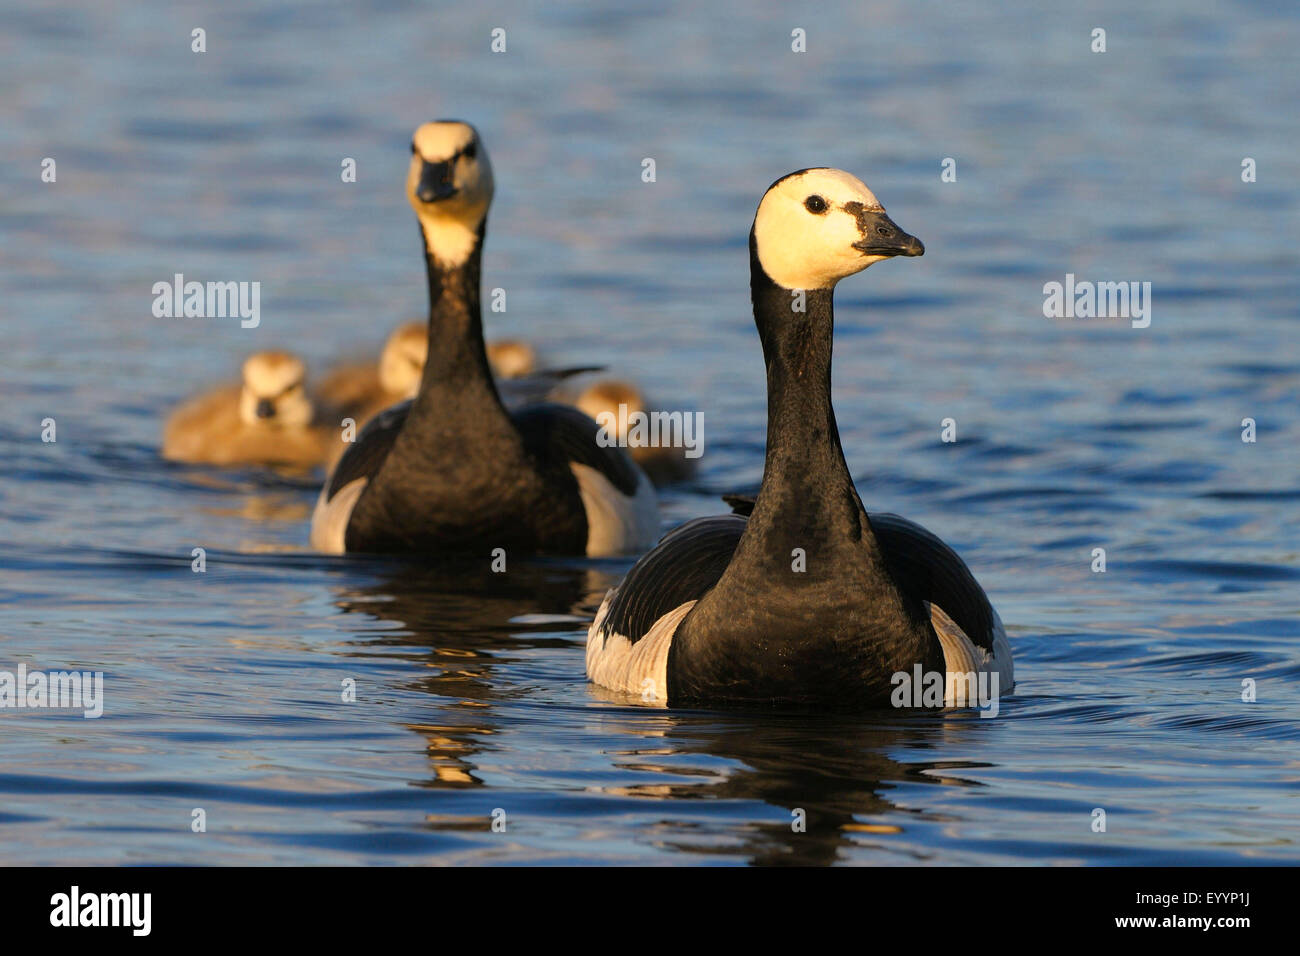 barnacle goose (Branta leucopsis), couple with chicks on a lake, Sweden Stock Photo